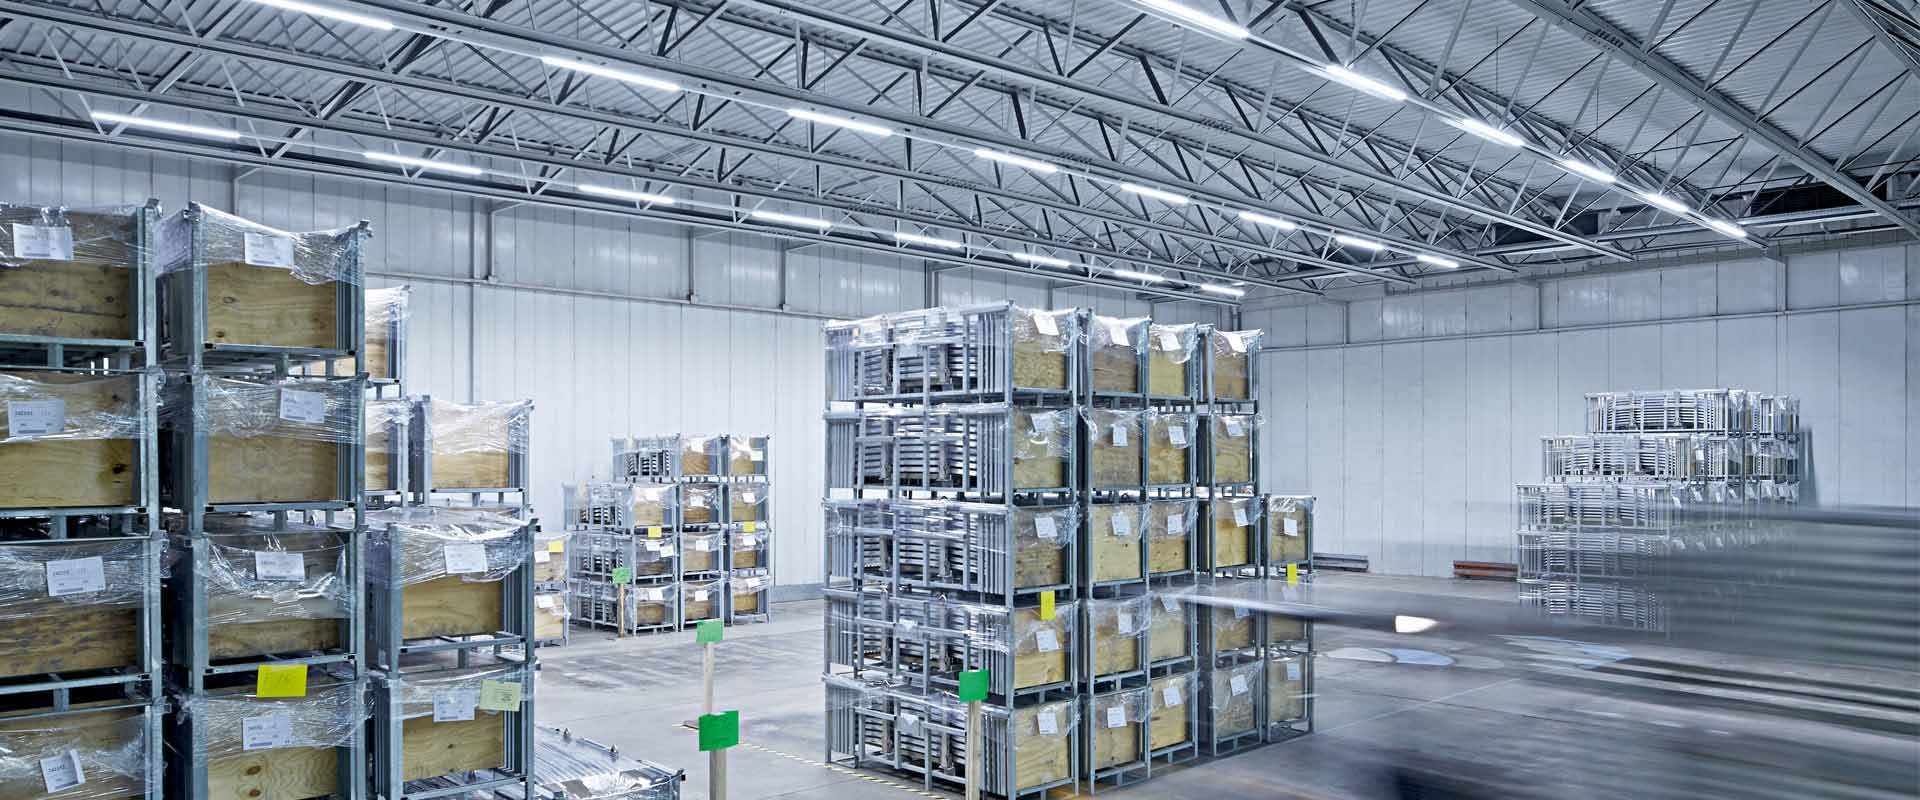 LED lighting of a warehouse